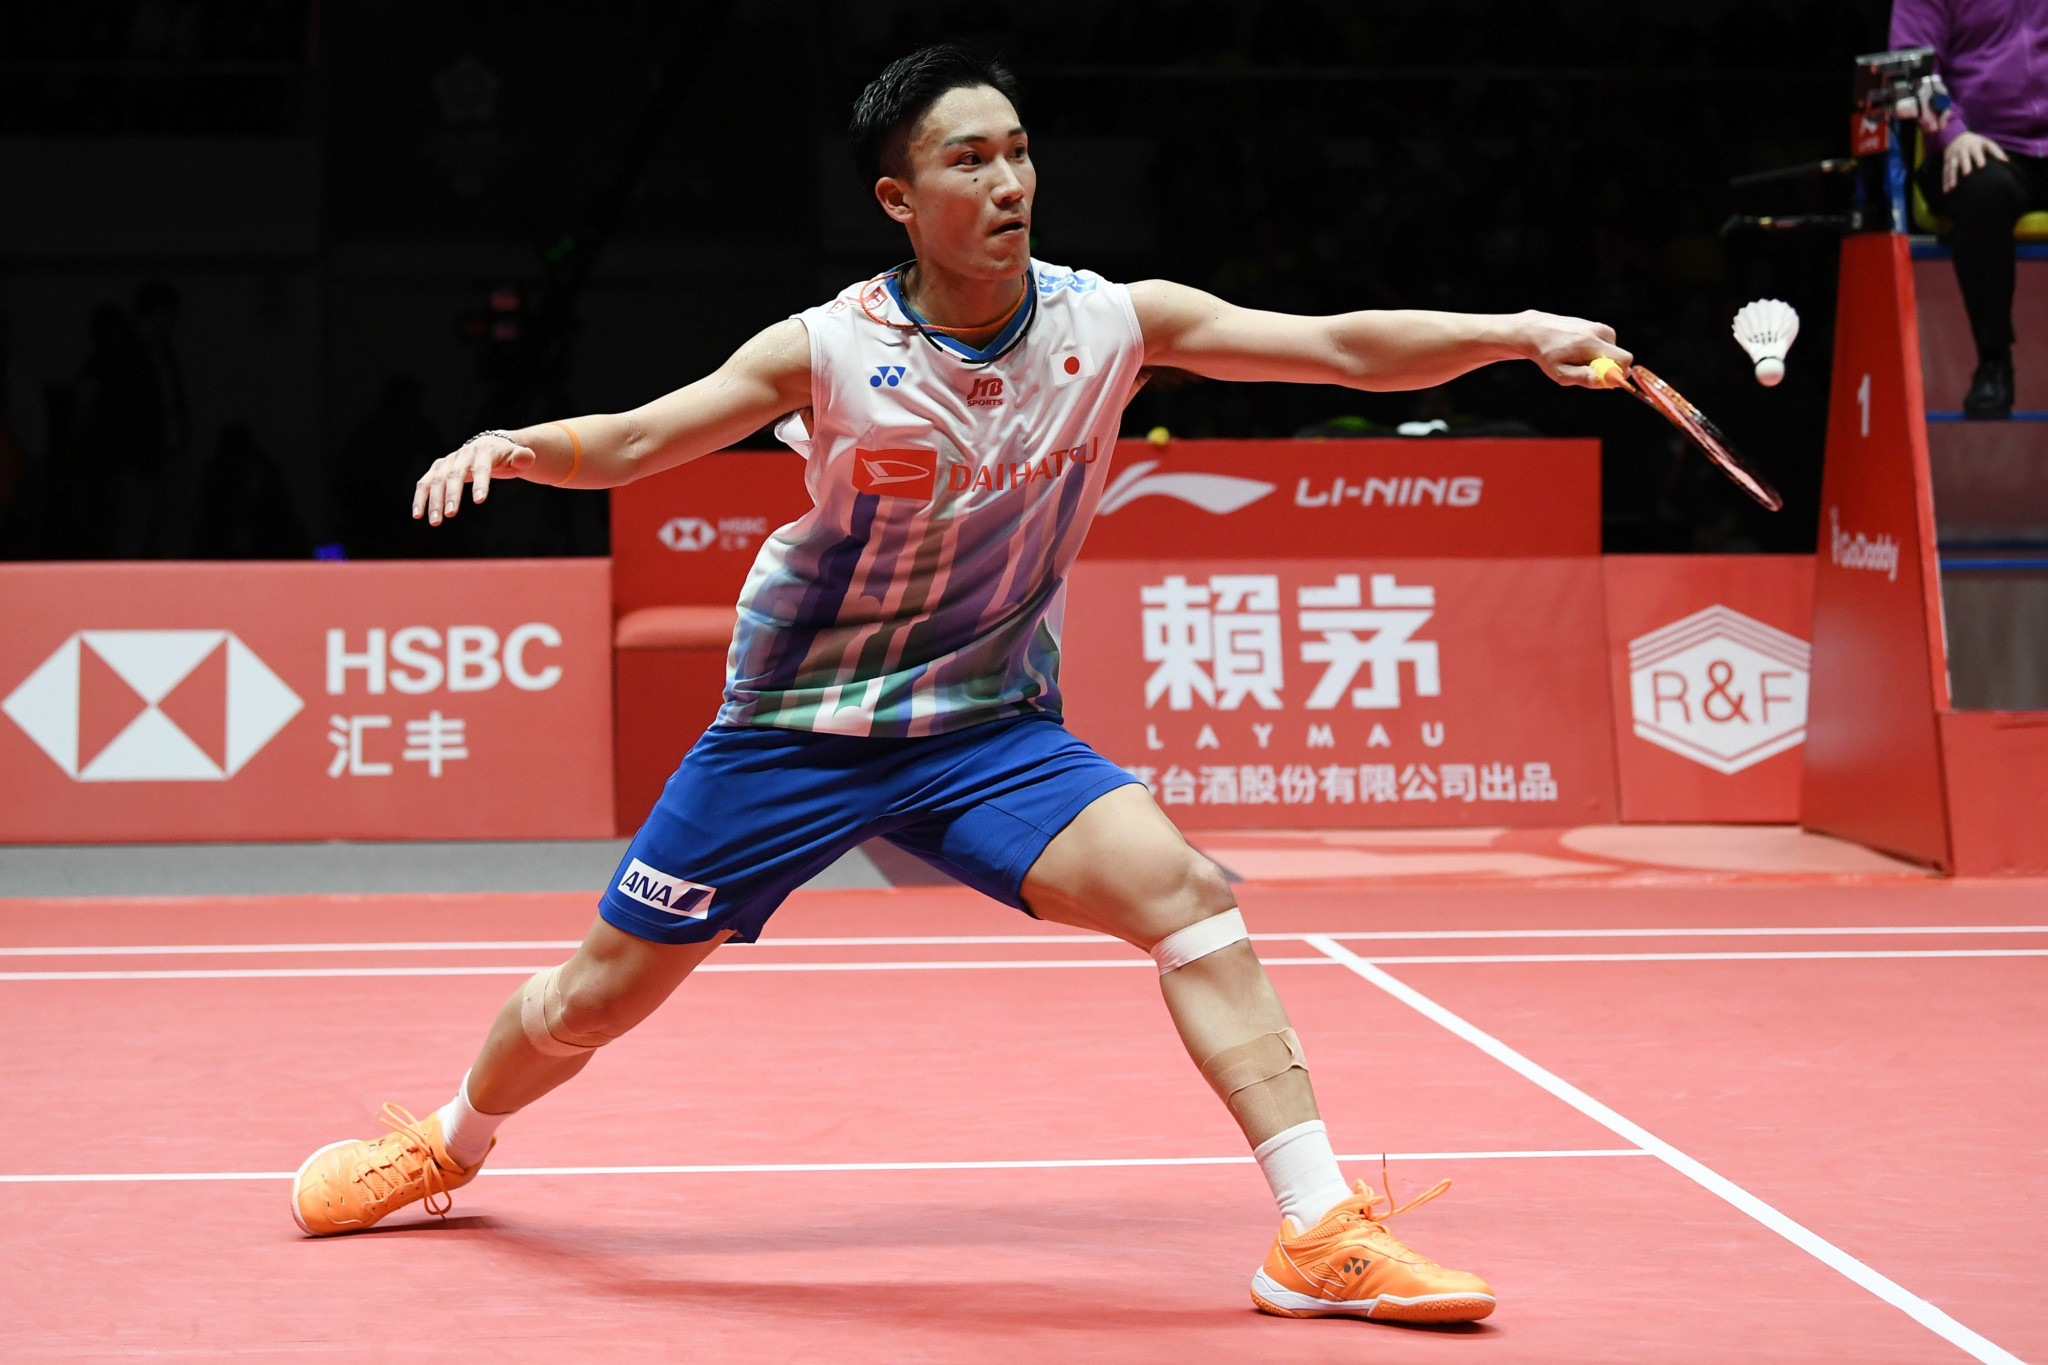 Japan's Kento Momota enters the Yonex German Open as the top seed in the men's singles ©Getty Images